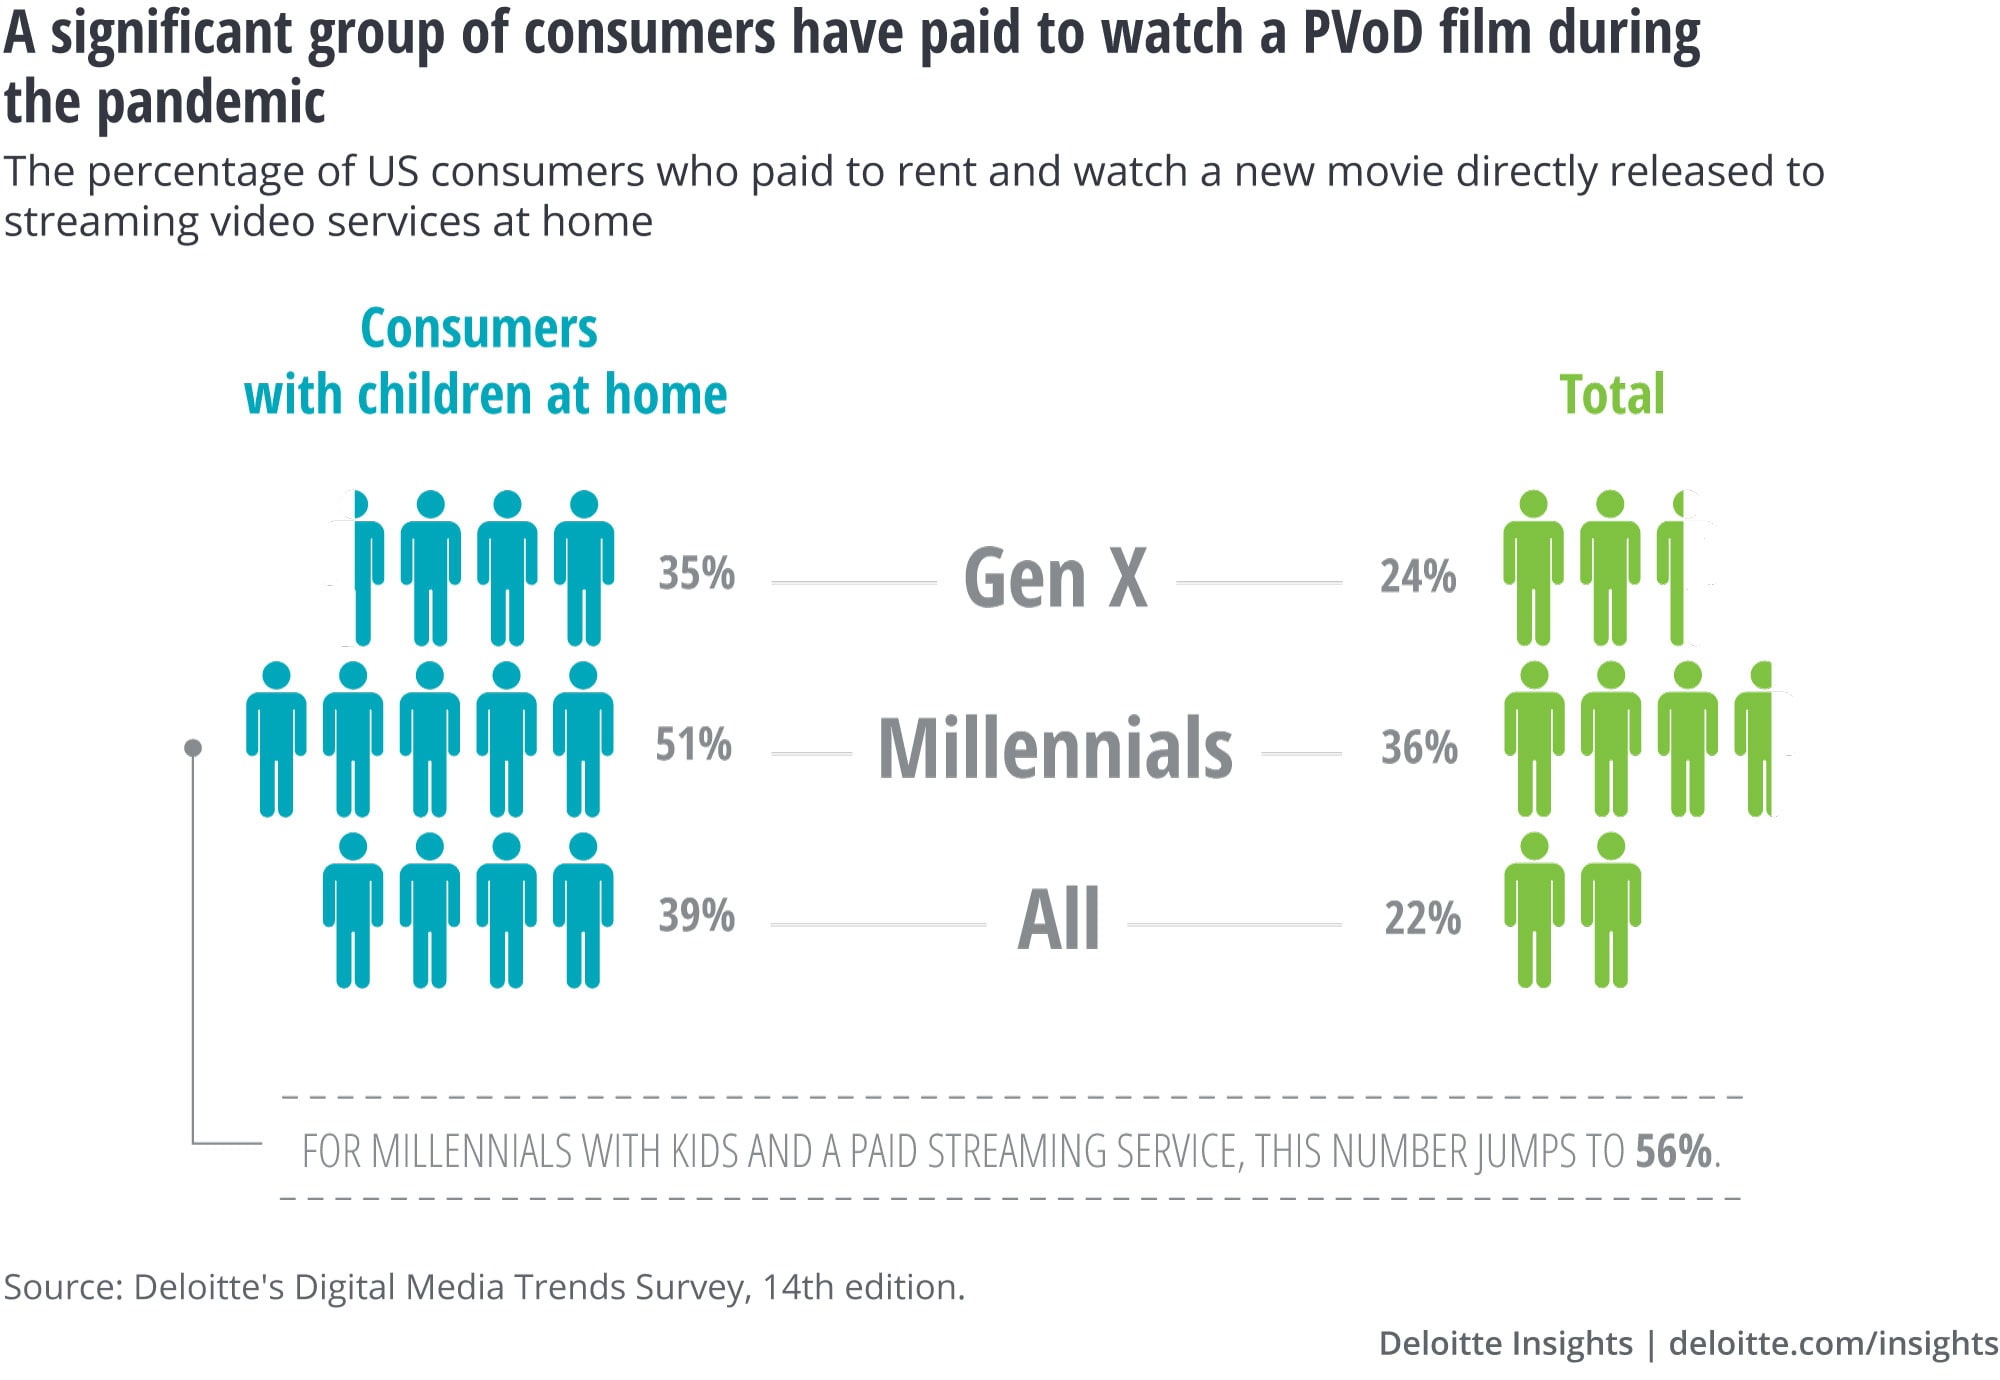 A significant number of consumers have paid to watch a PVoD film during the pandemic